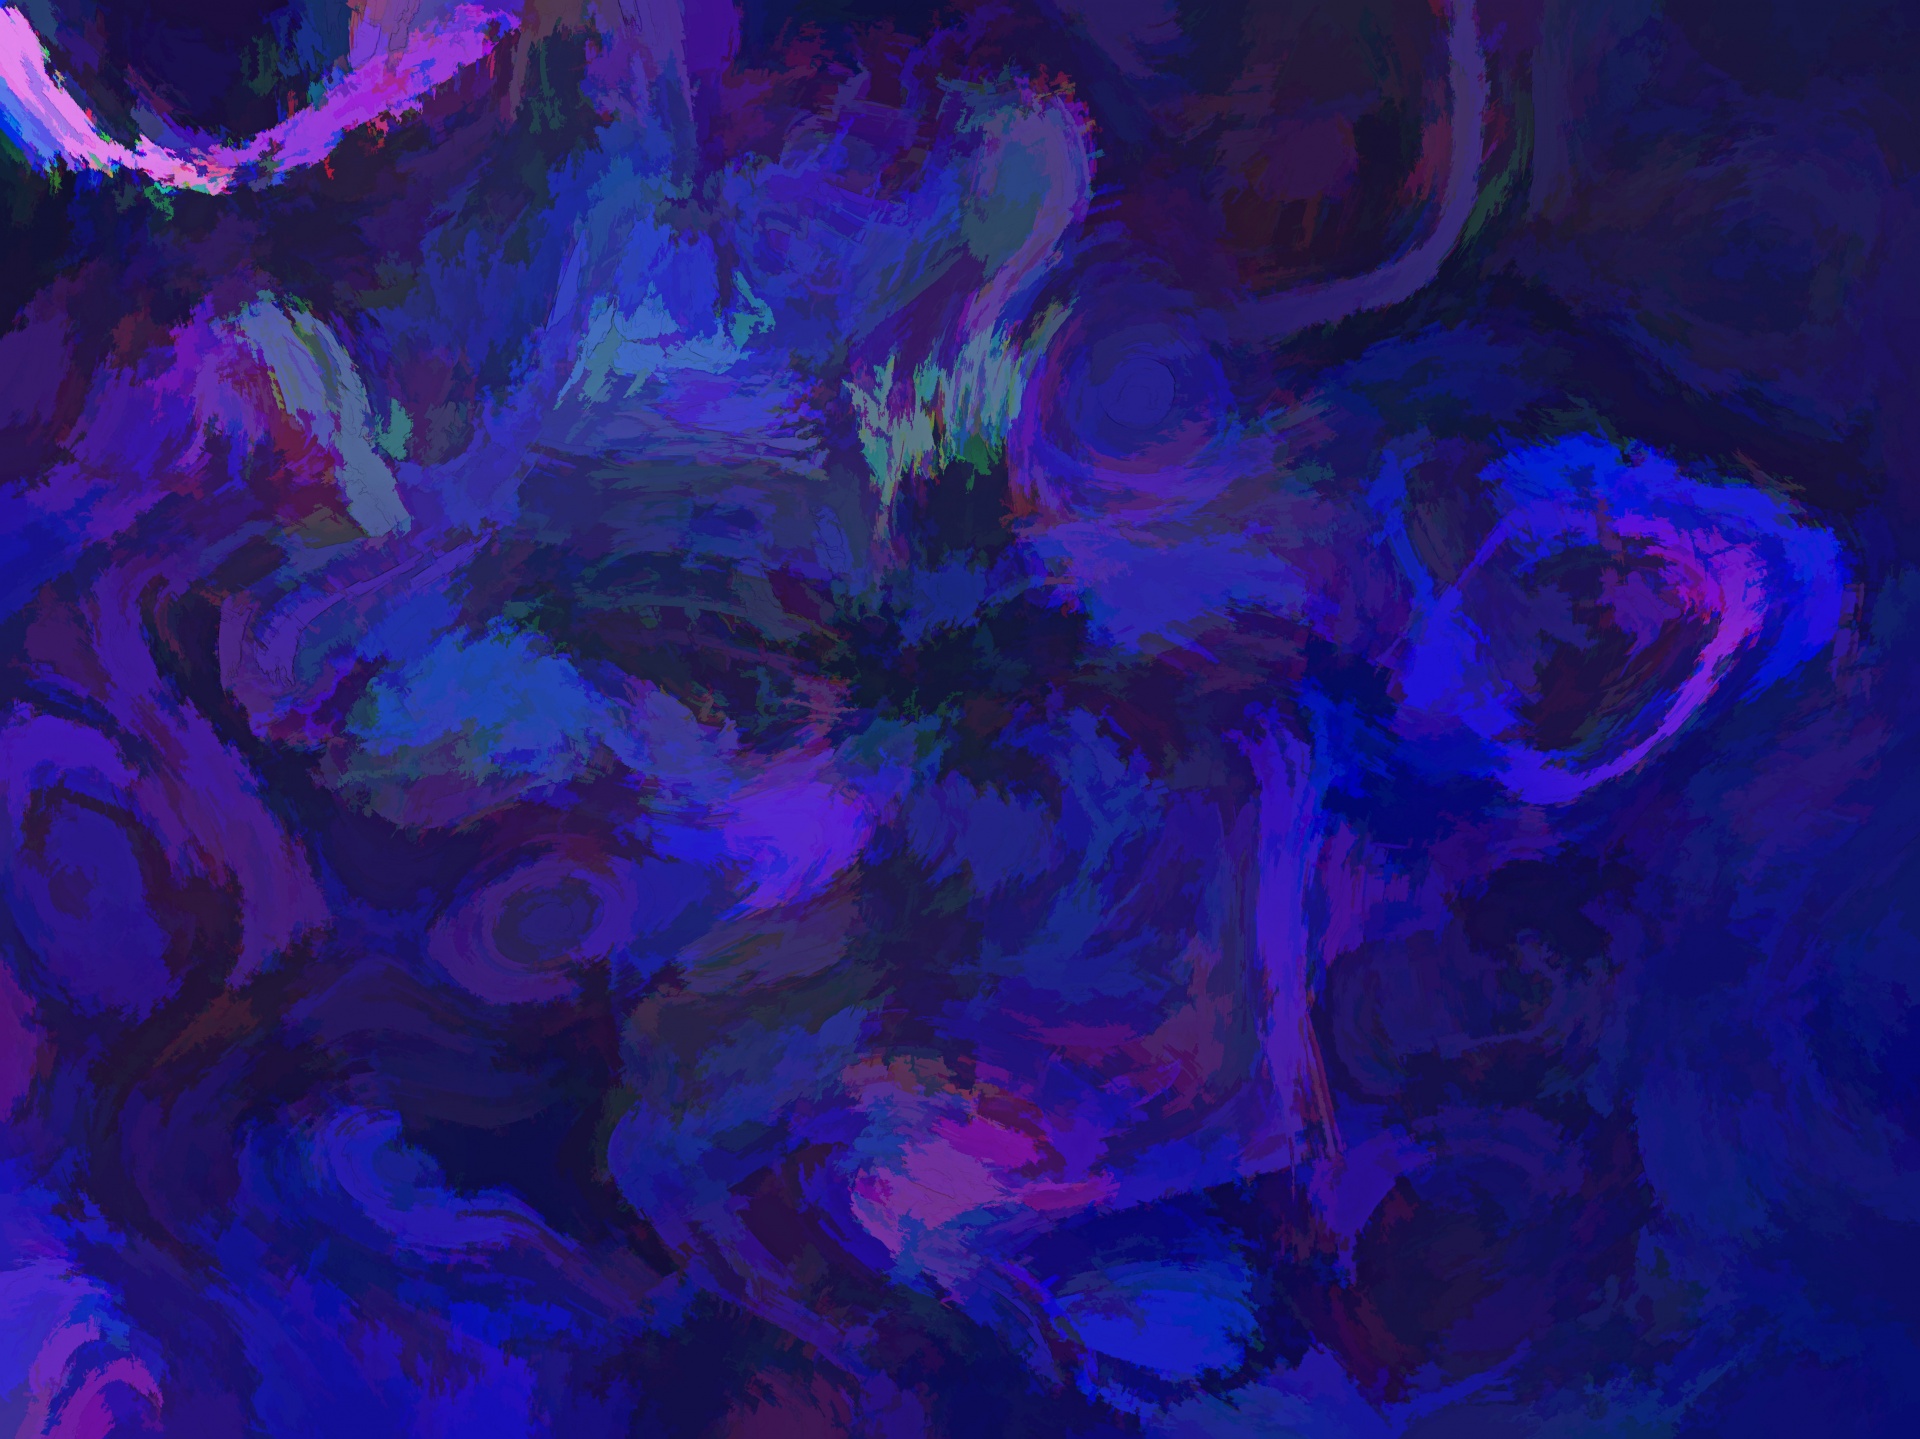 Dark colors formed in a chaotic pattern for background